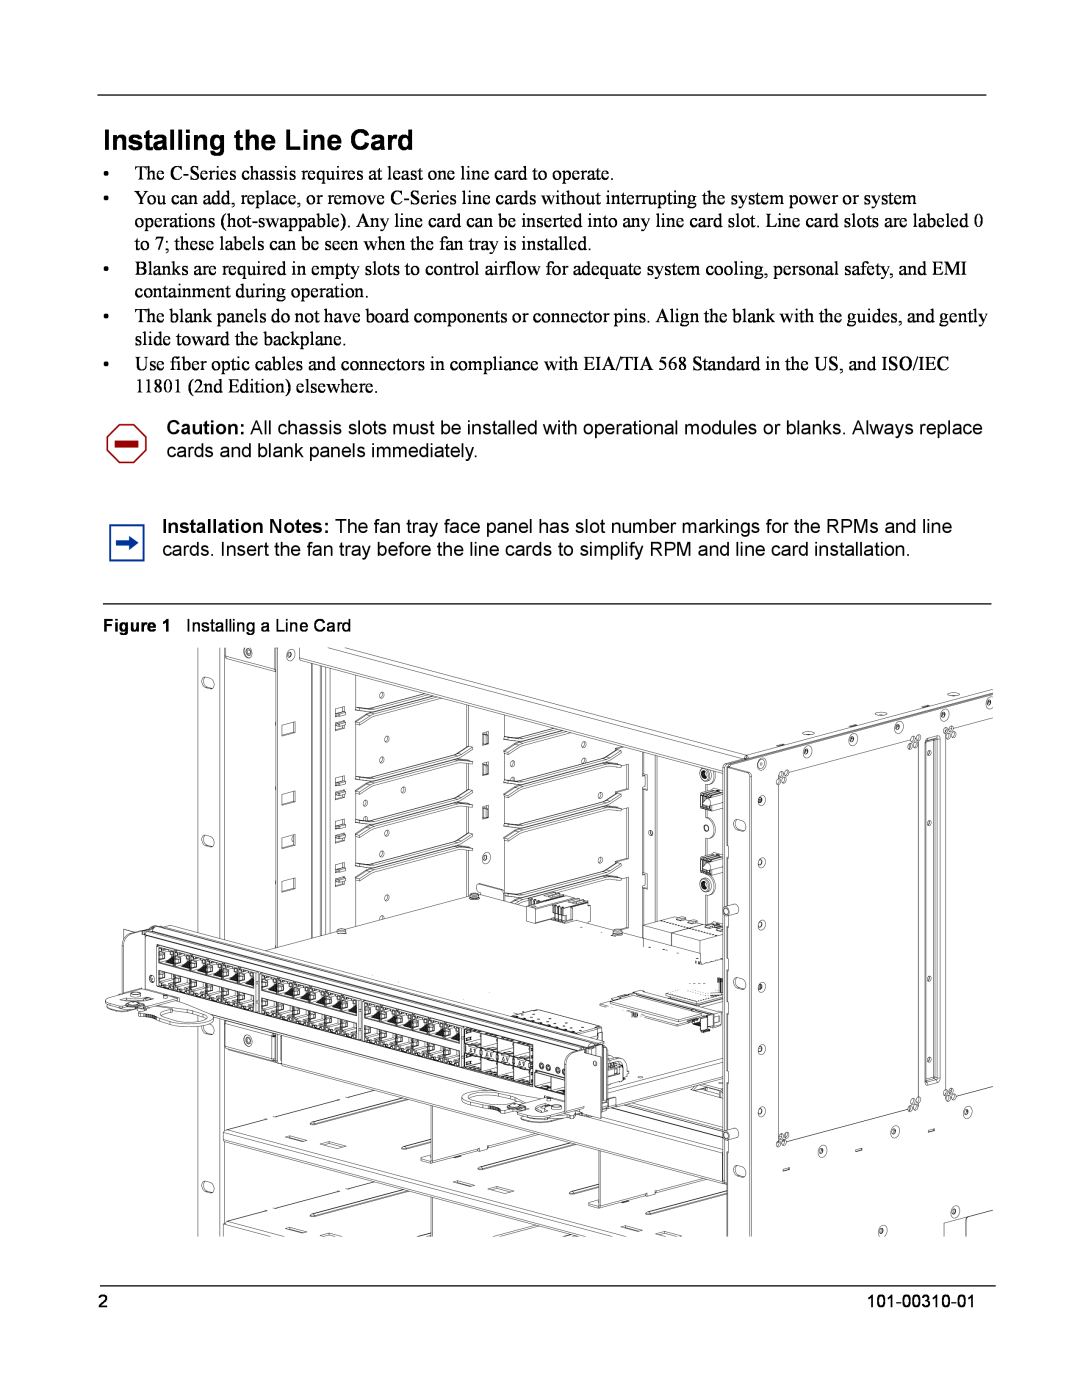 Force10 Networks C-Series installation instructions Installing the Line Card 